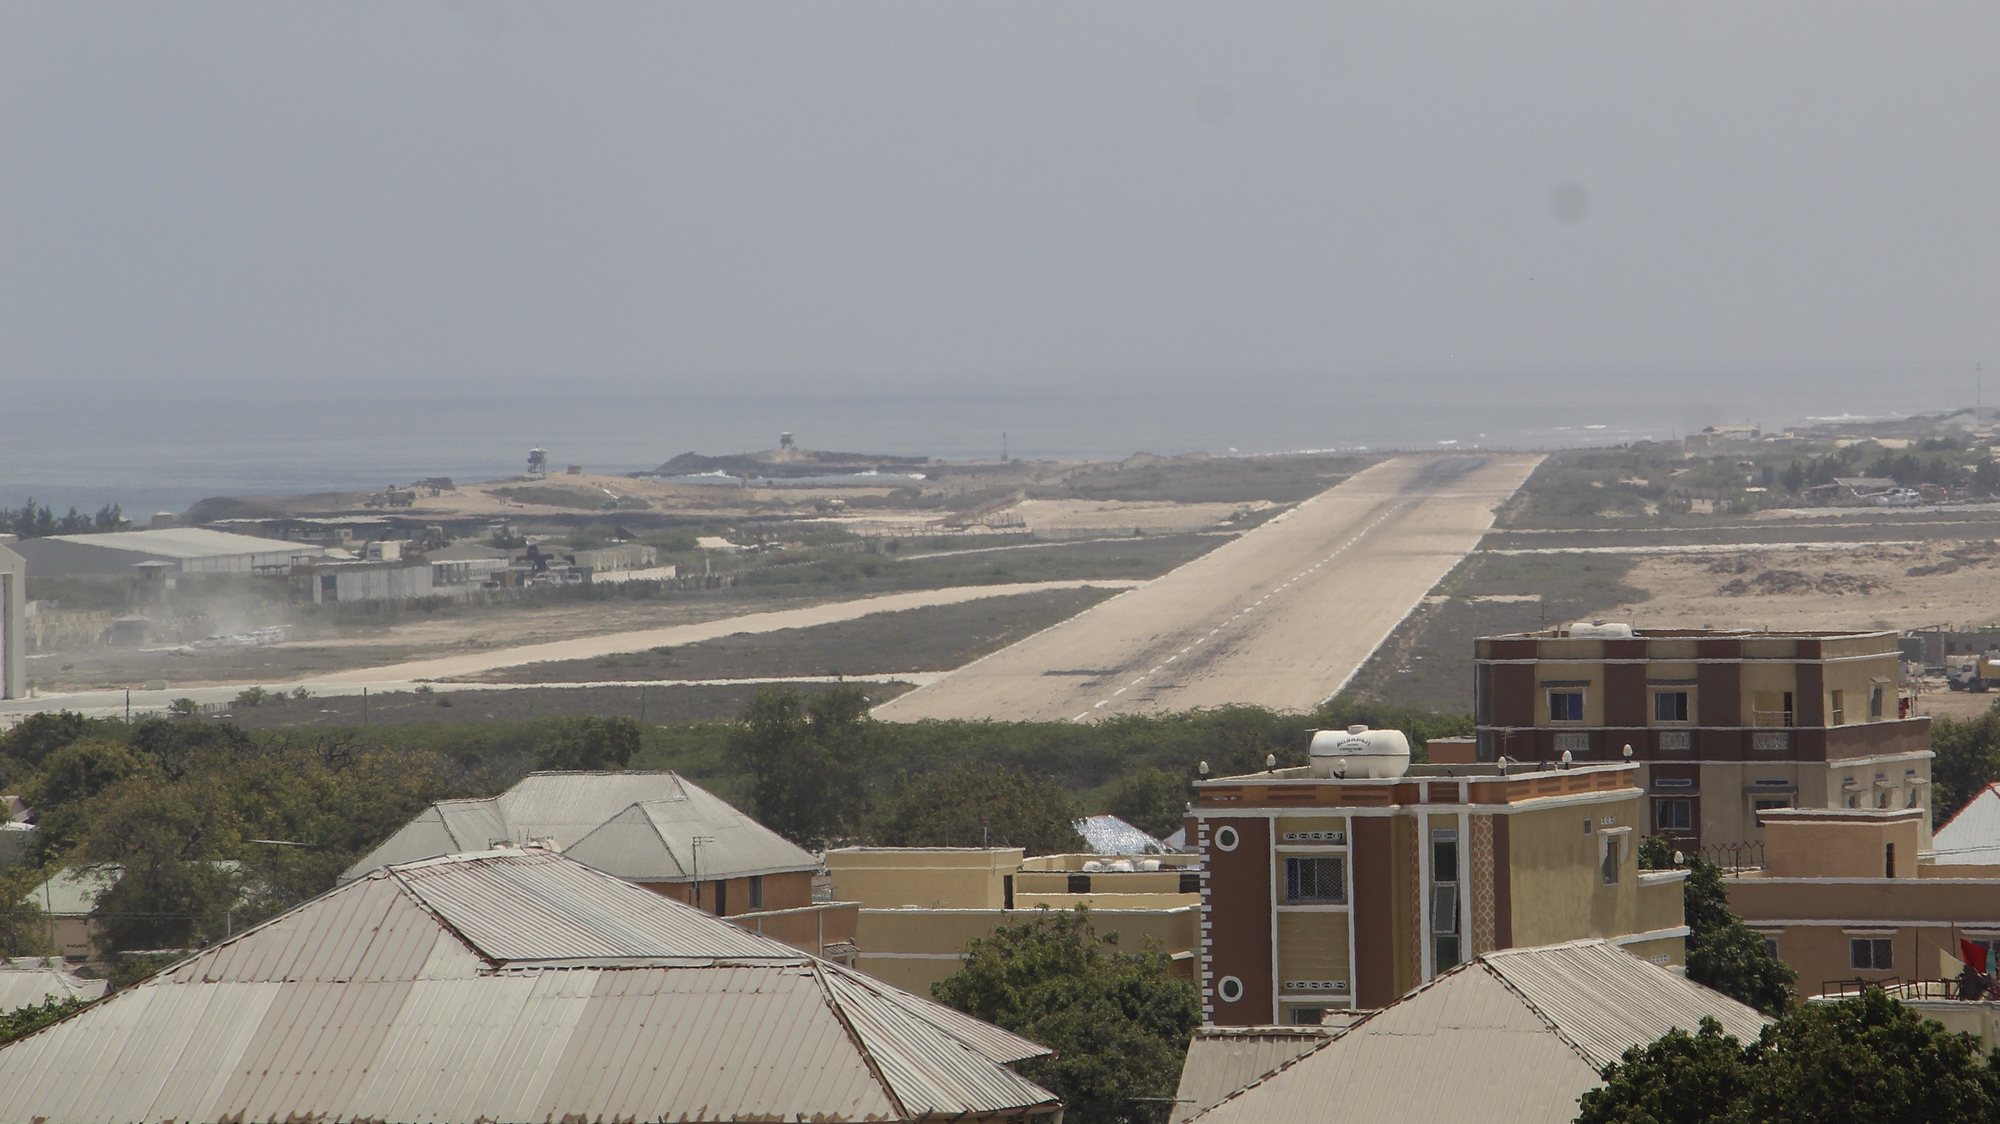 epa09843930 General view of Adan Abdulle International Airport in the aftermath of an attack by Al-Shabaab militants near its gate in Mogadishu, Somalia, 23 March 2022. According to Somali state television, security forces killed two militants attempting to burst into the Halane military base, located near the airport, hosting the African Union (AMISOM) peacekeeping forces, the United Nations personnel and other international organizations. Two AMISOM forces were reportedly injured.  EPA/SAID YUSUF WARSAME